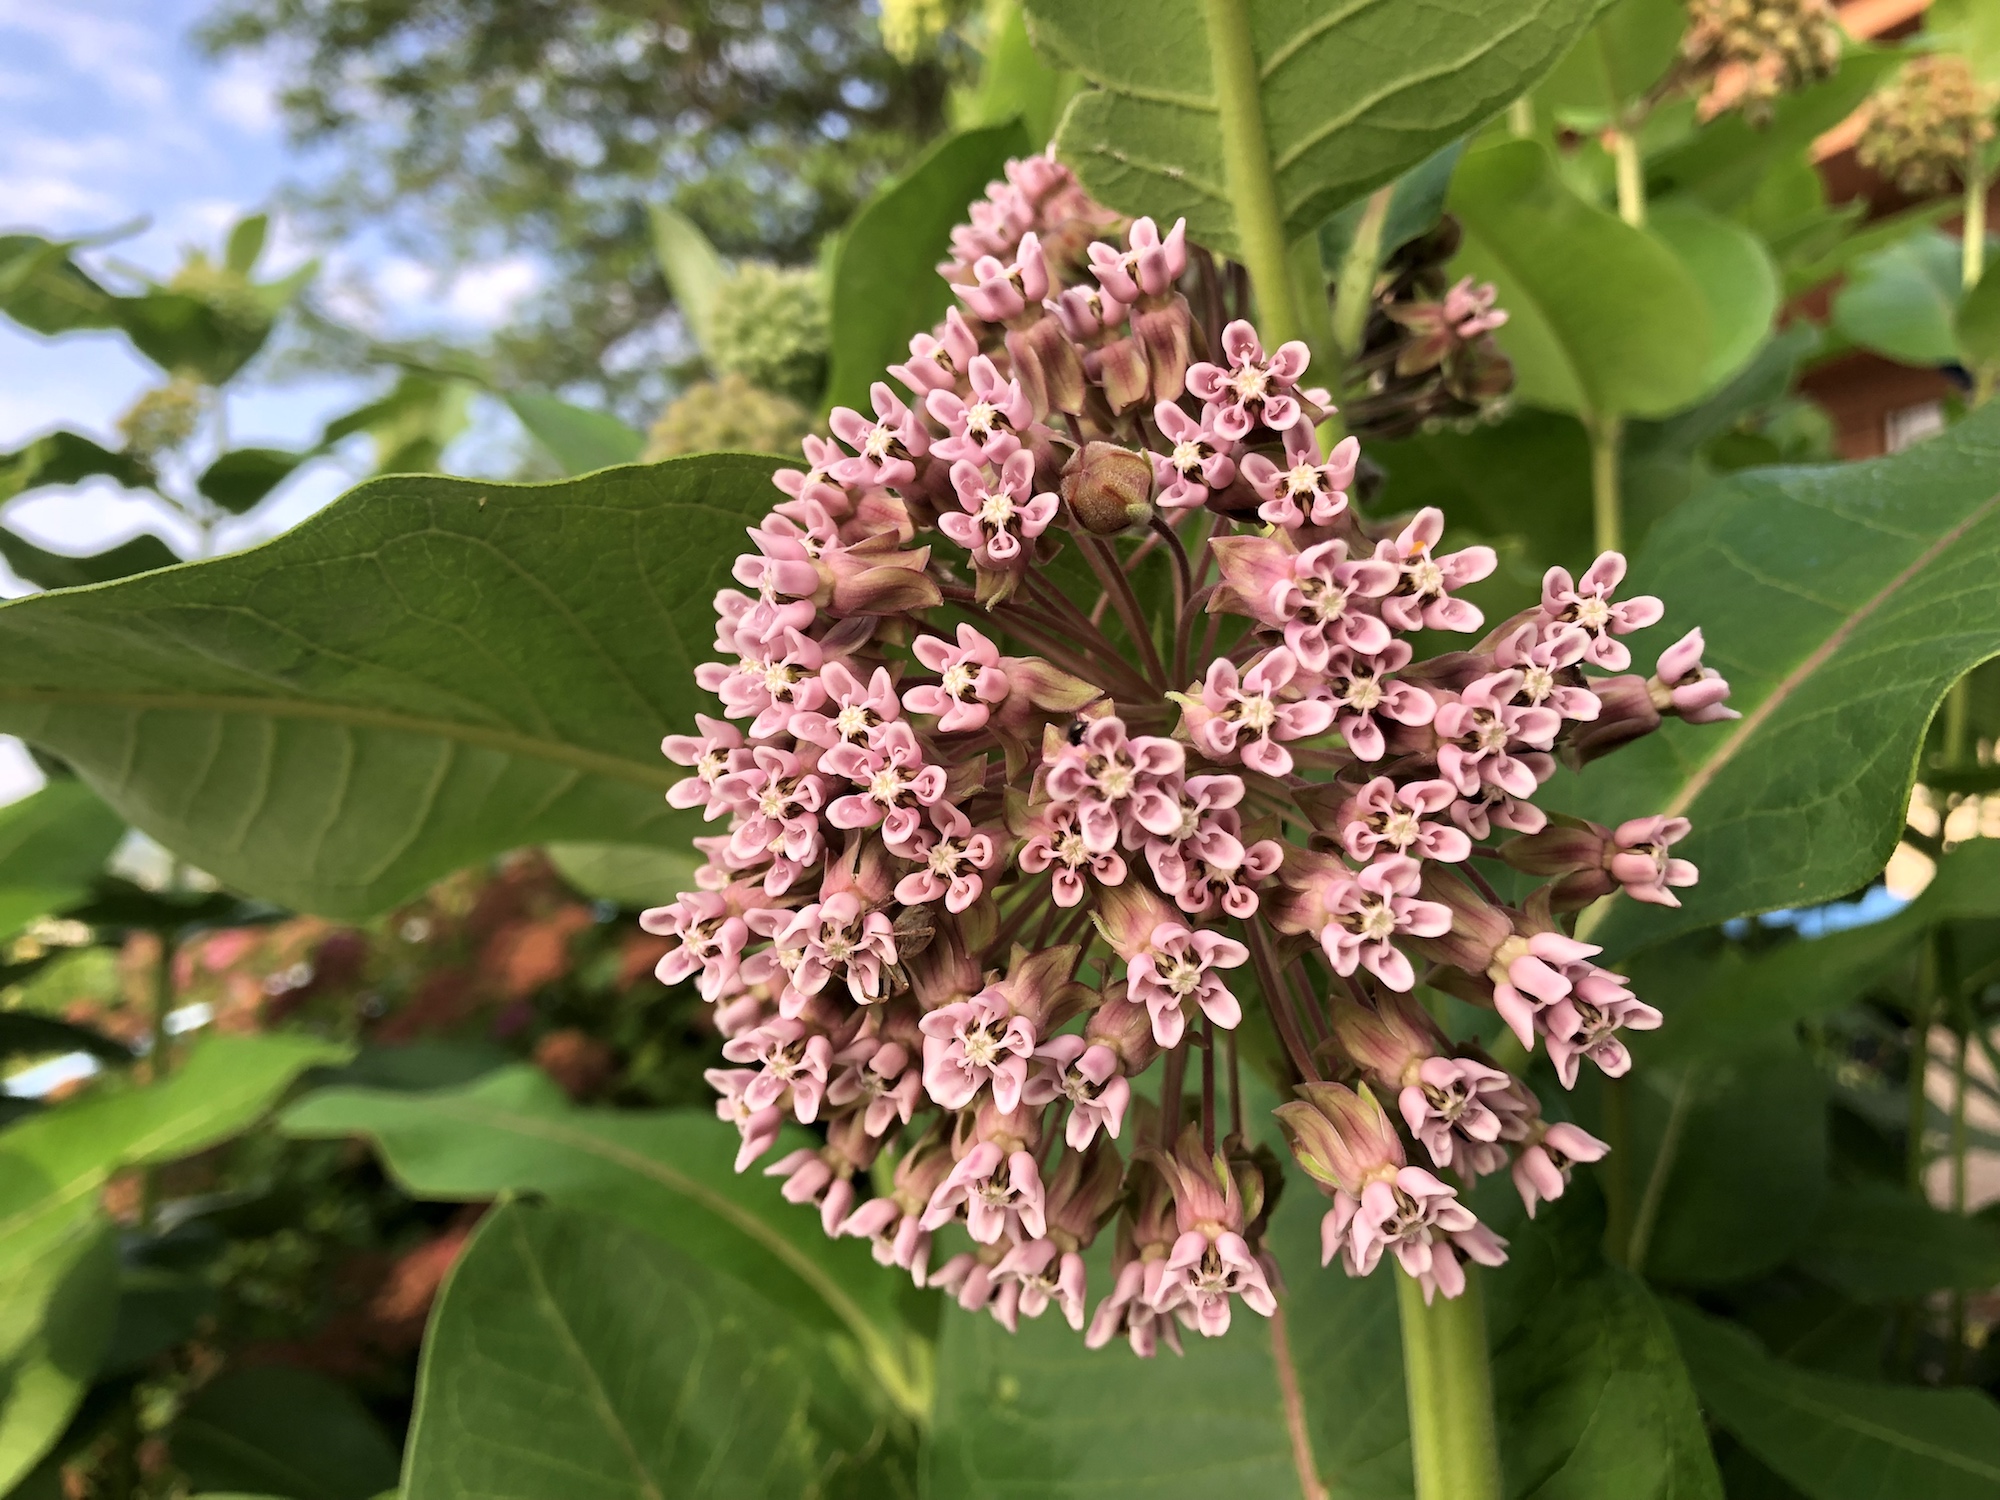 A close-up photo of a milkweed plant with small pink blossoms